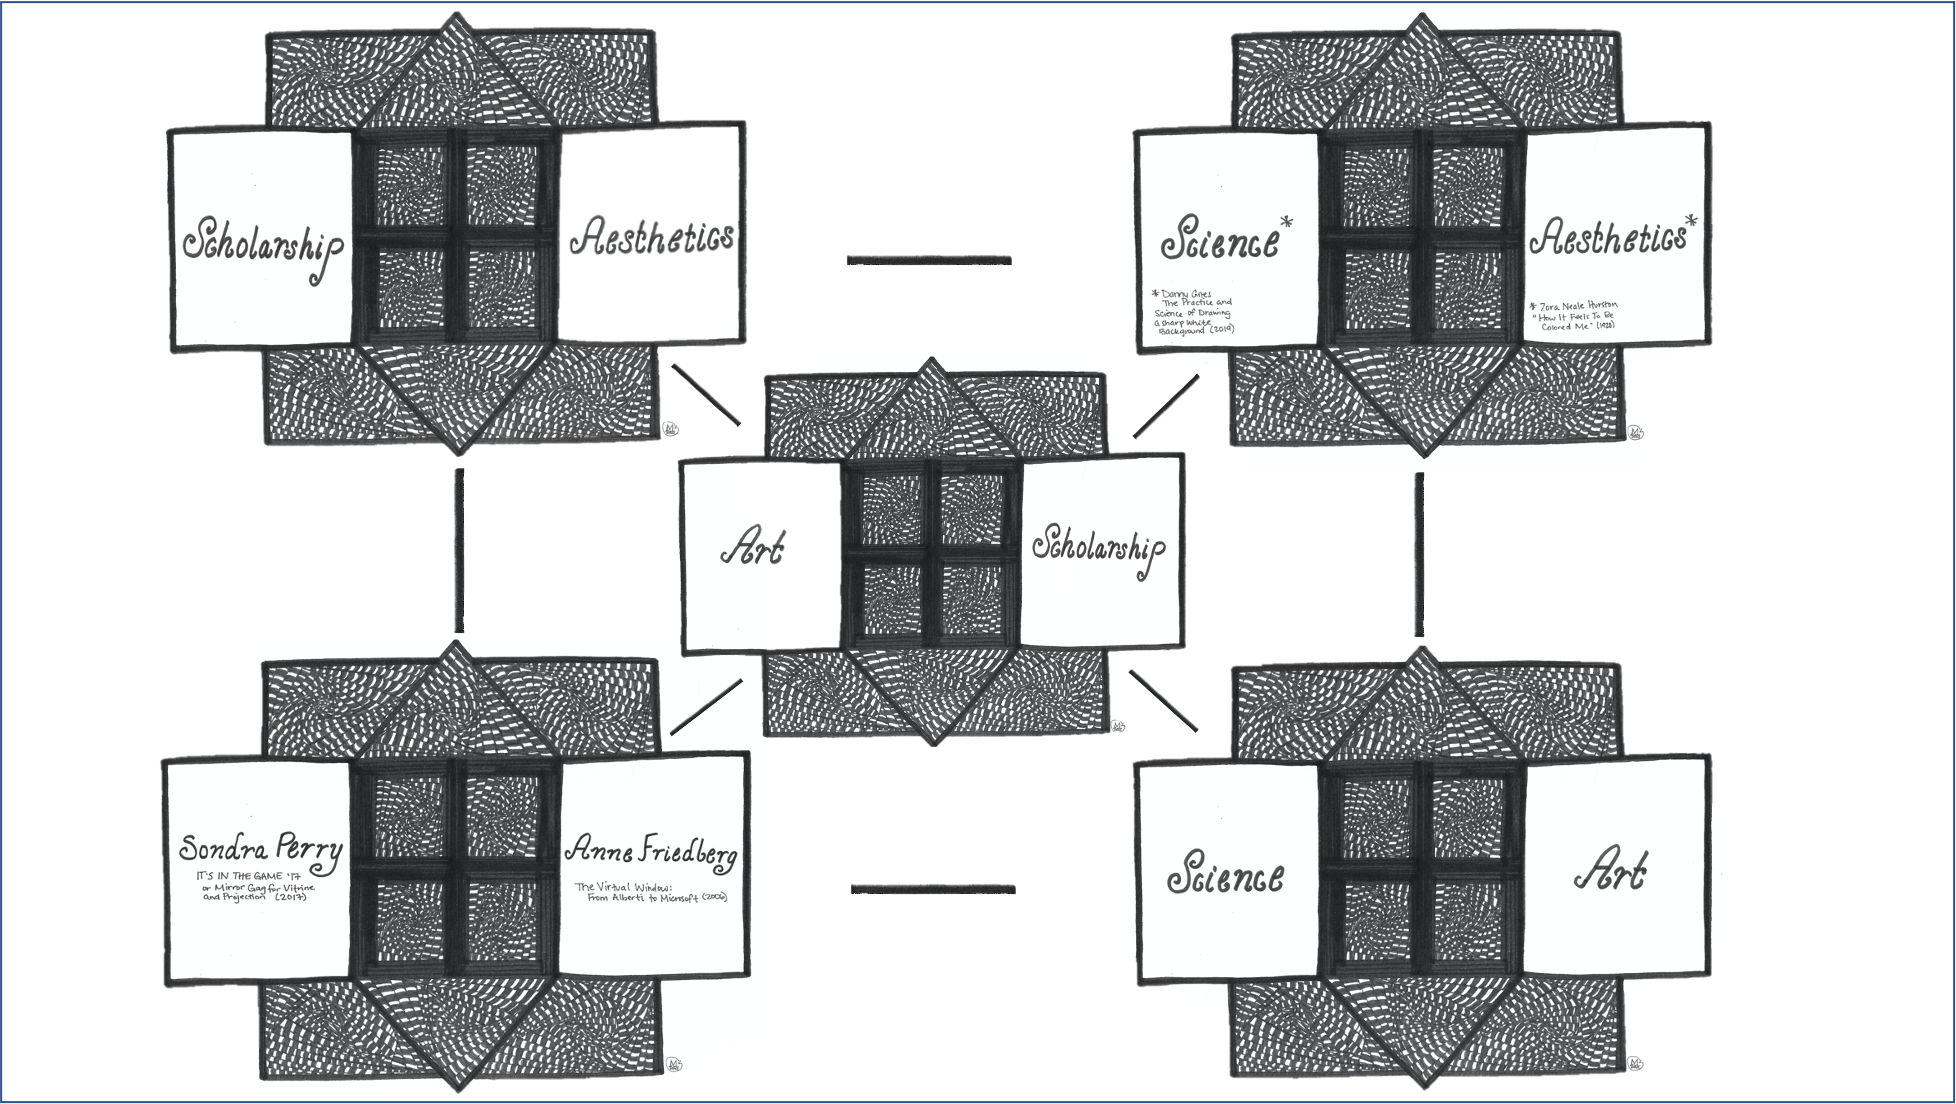 A ink drawing of a complex diagram with five interrelated parts representing an unfolded tesseracts